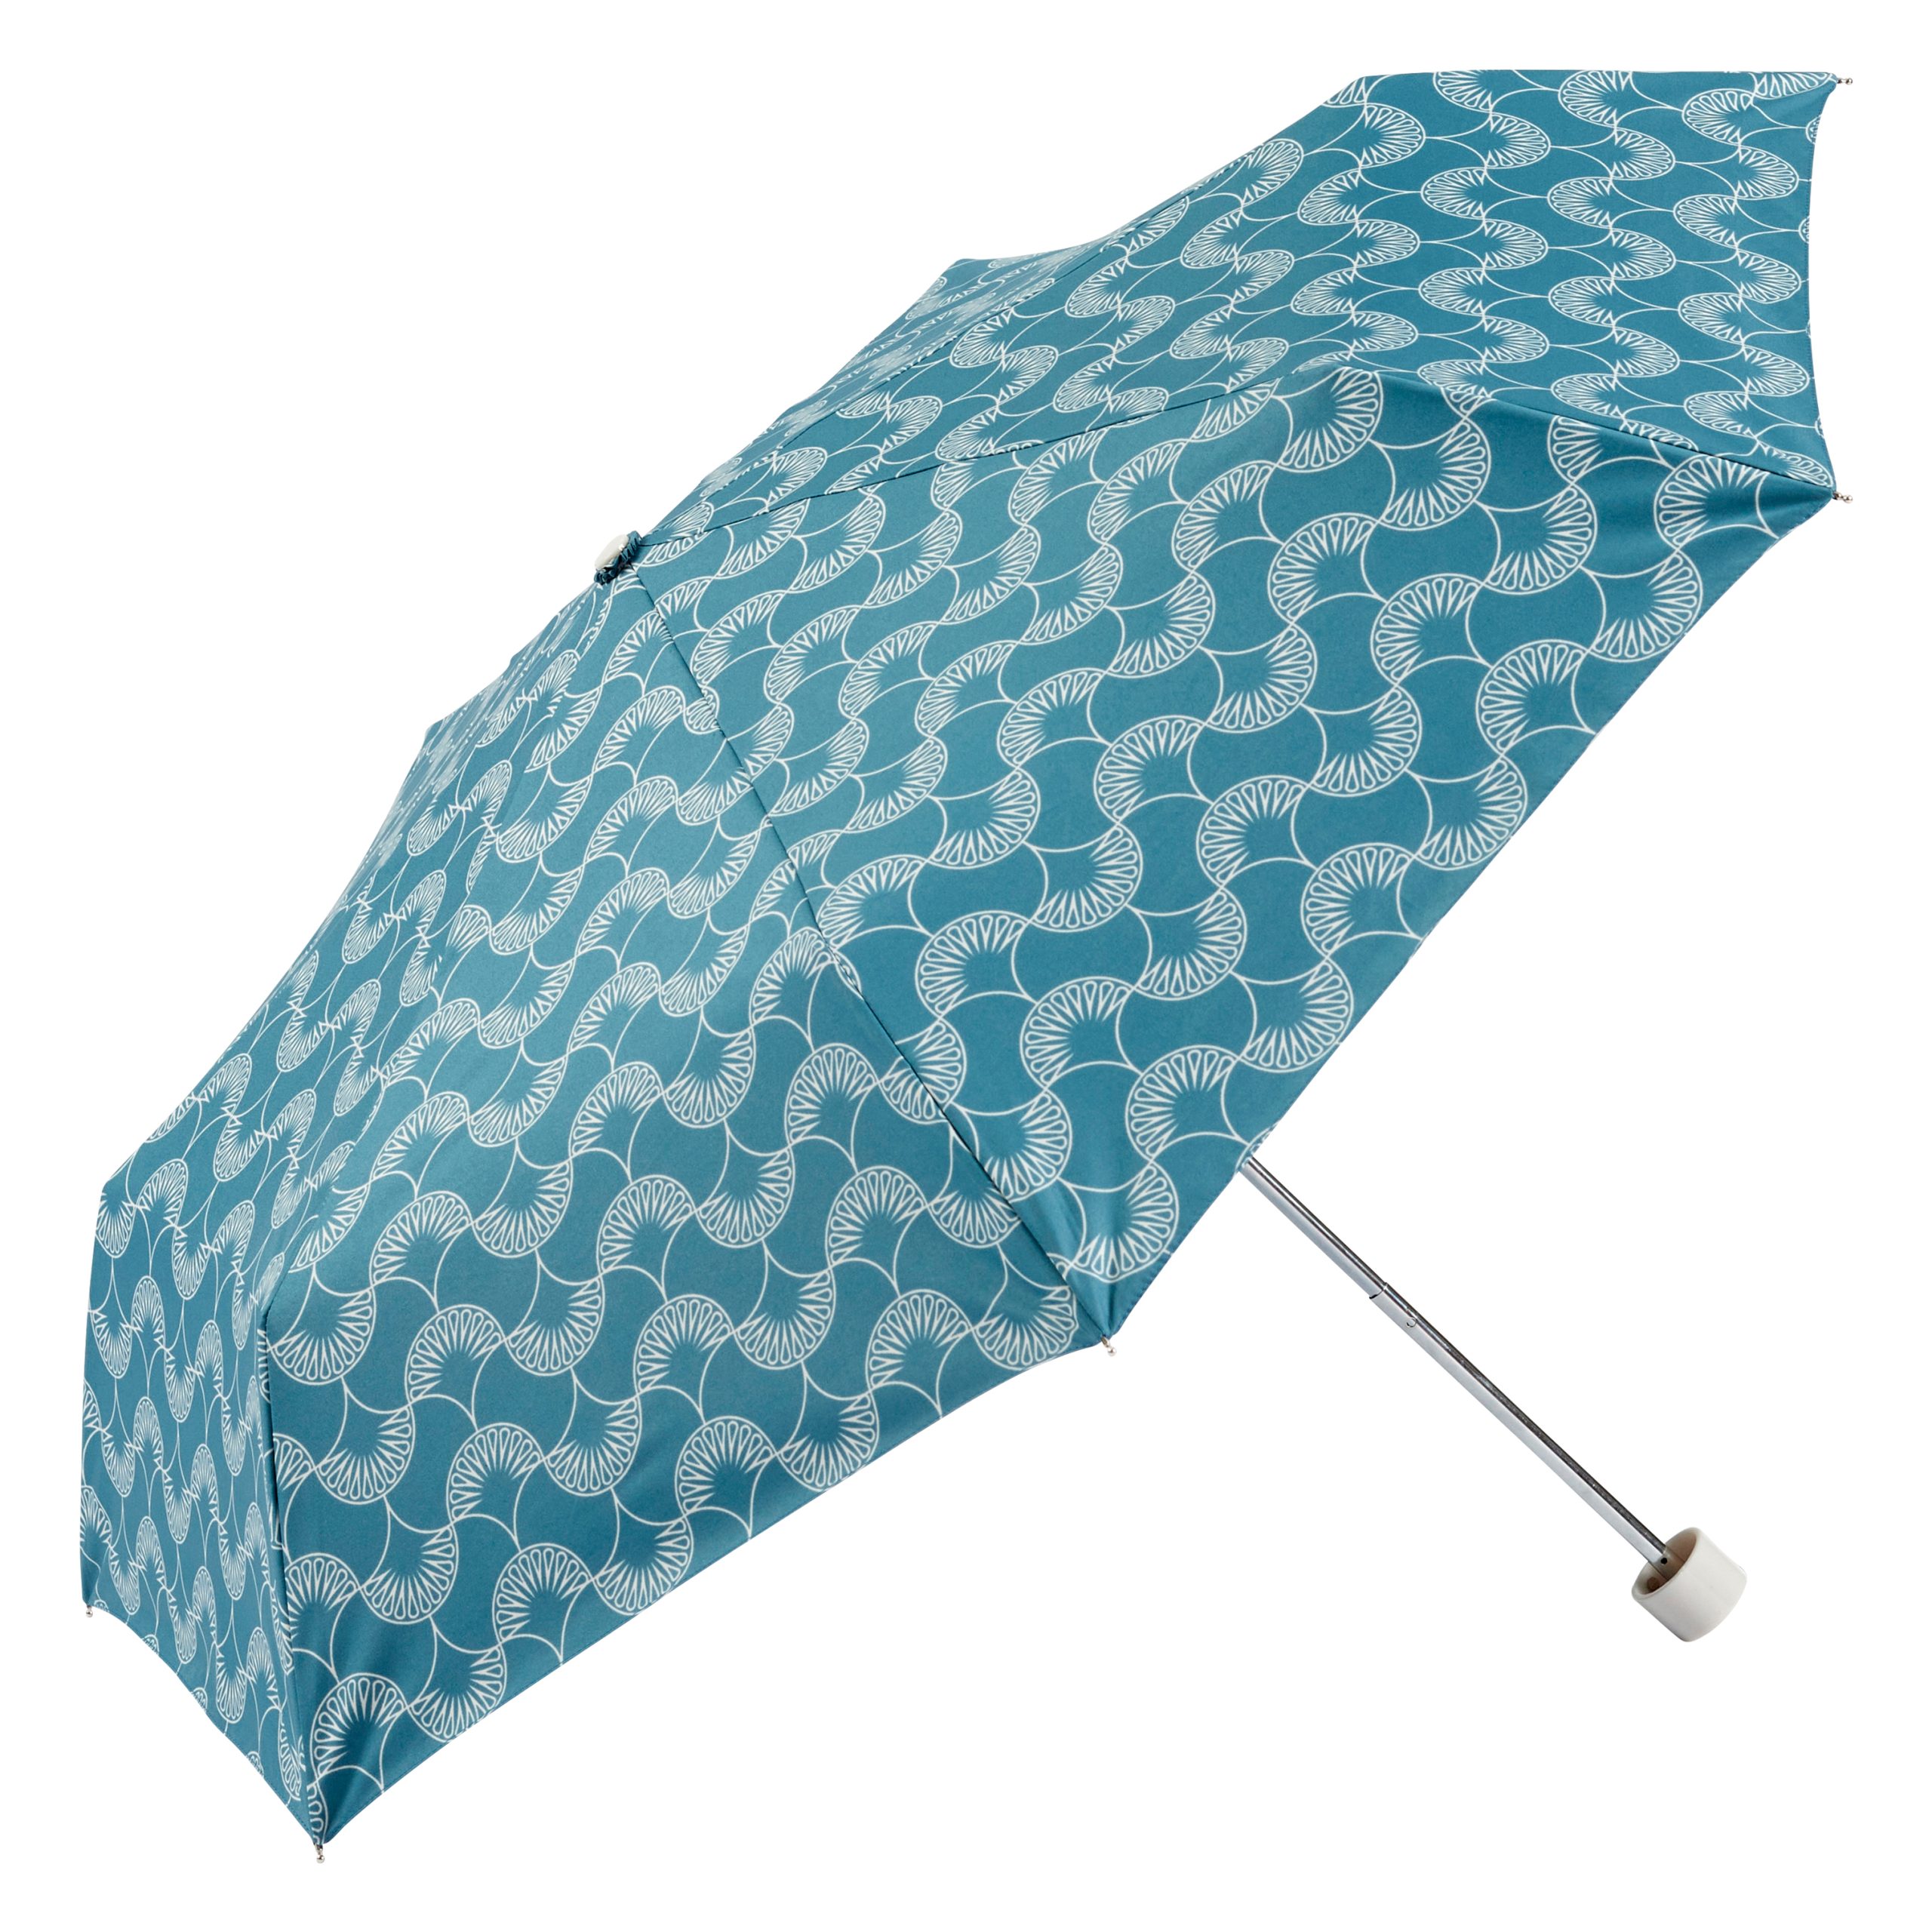 Ladies UV Protective Compact Umbrella - blue patterned - open - side view